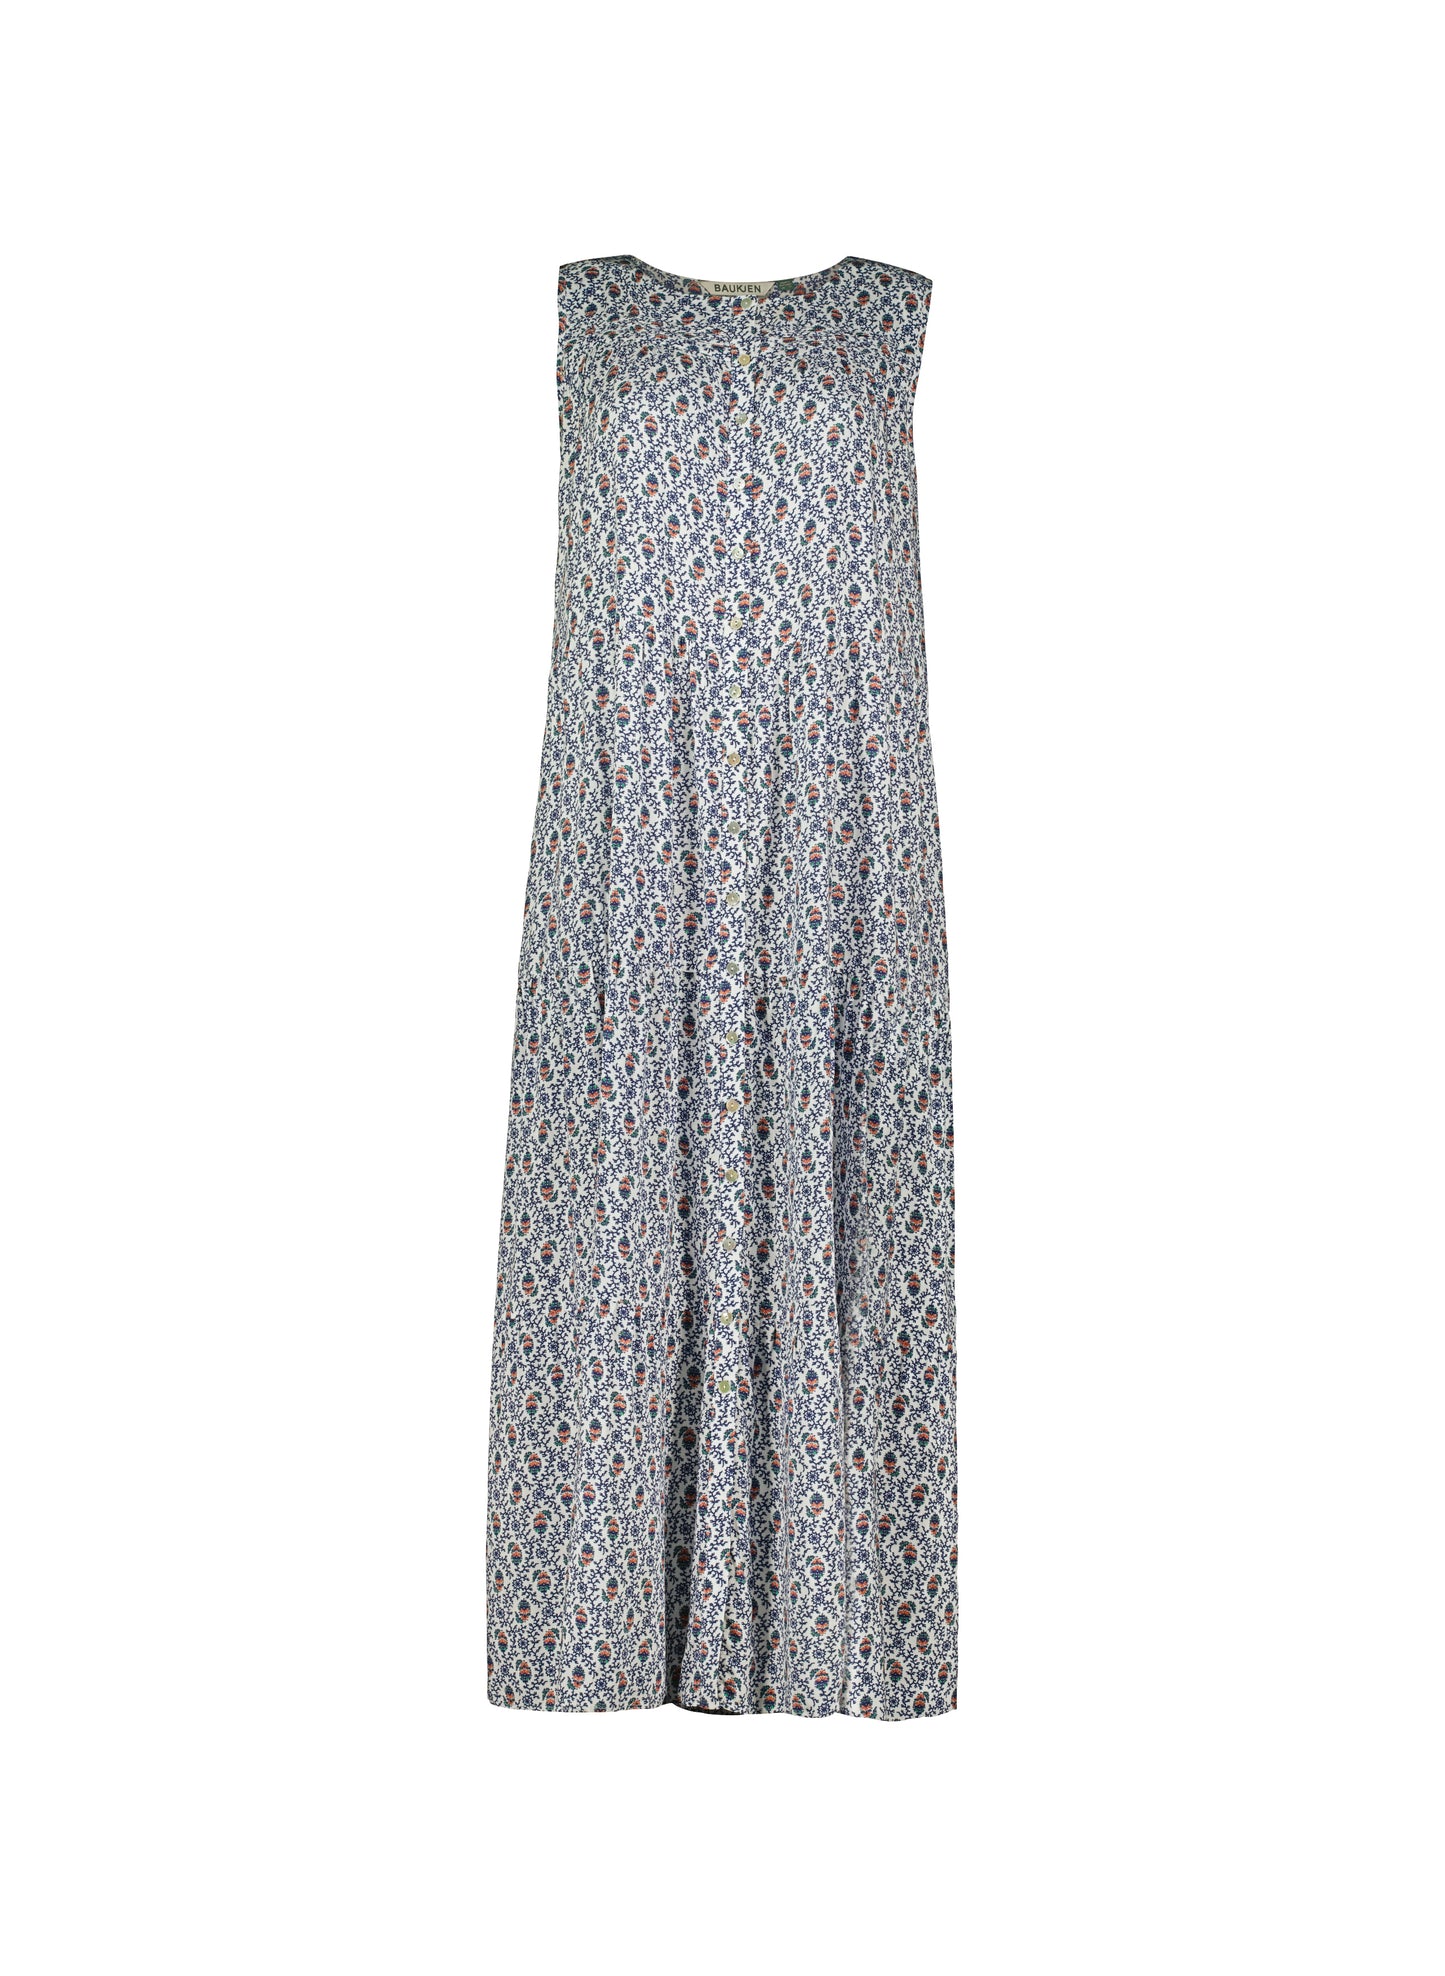 Pre-Loved Loulou Dress with LENZING™ ECOVERO™